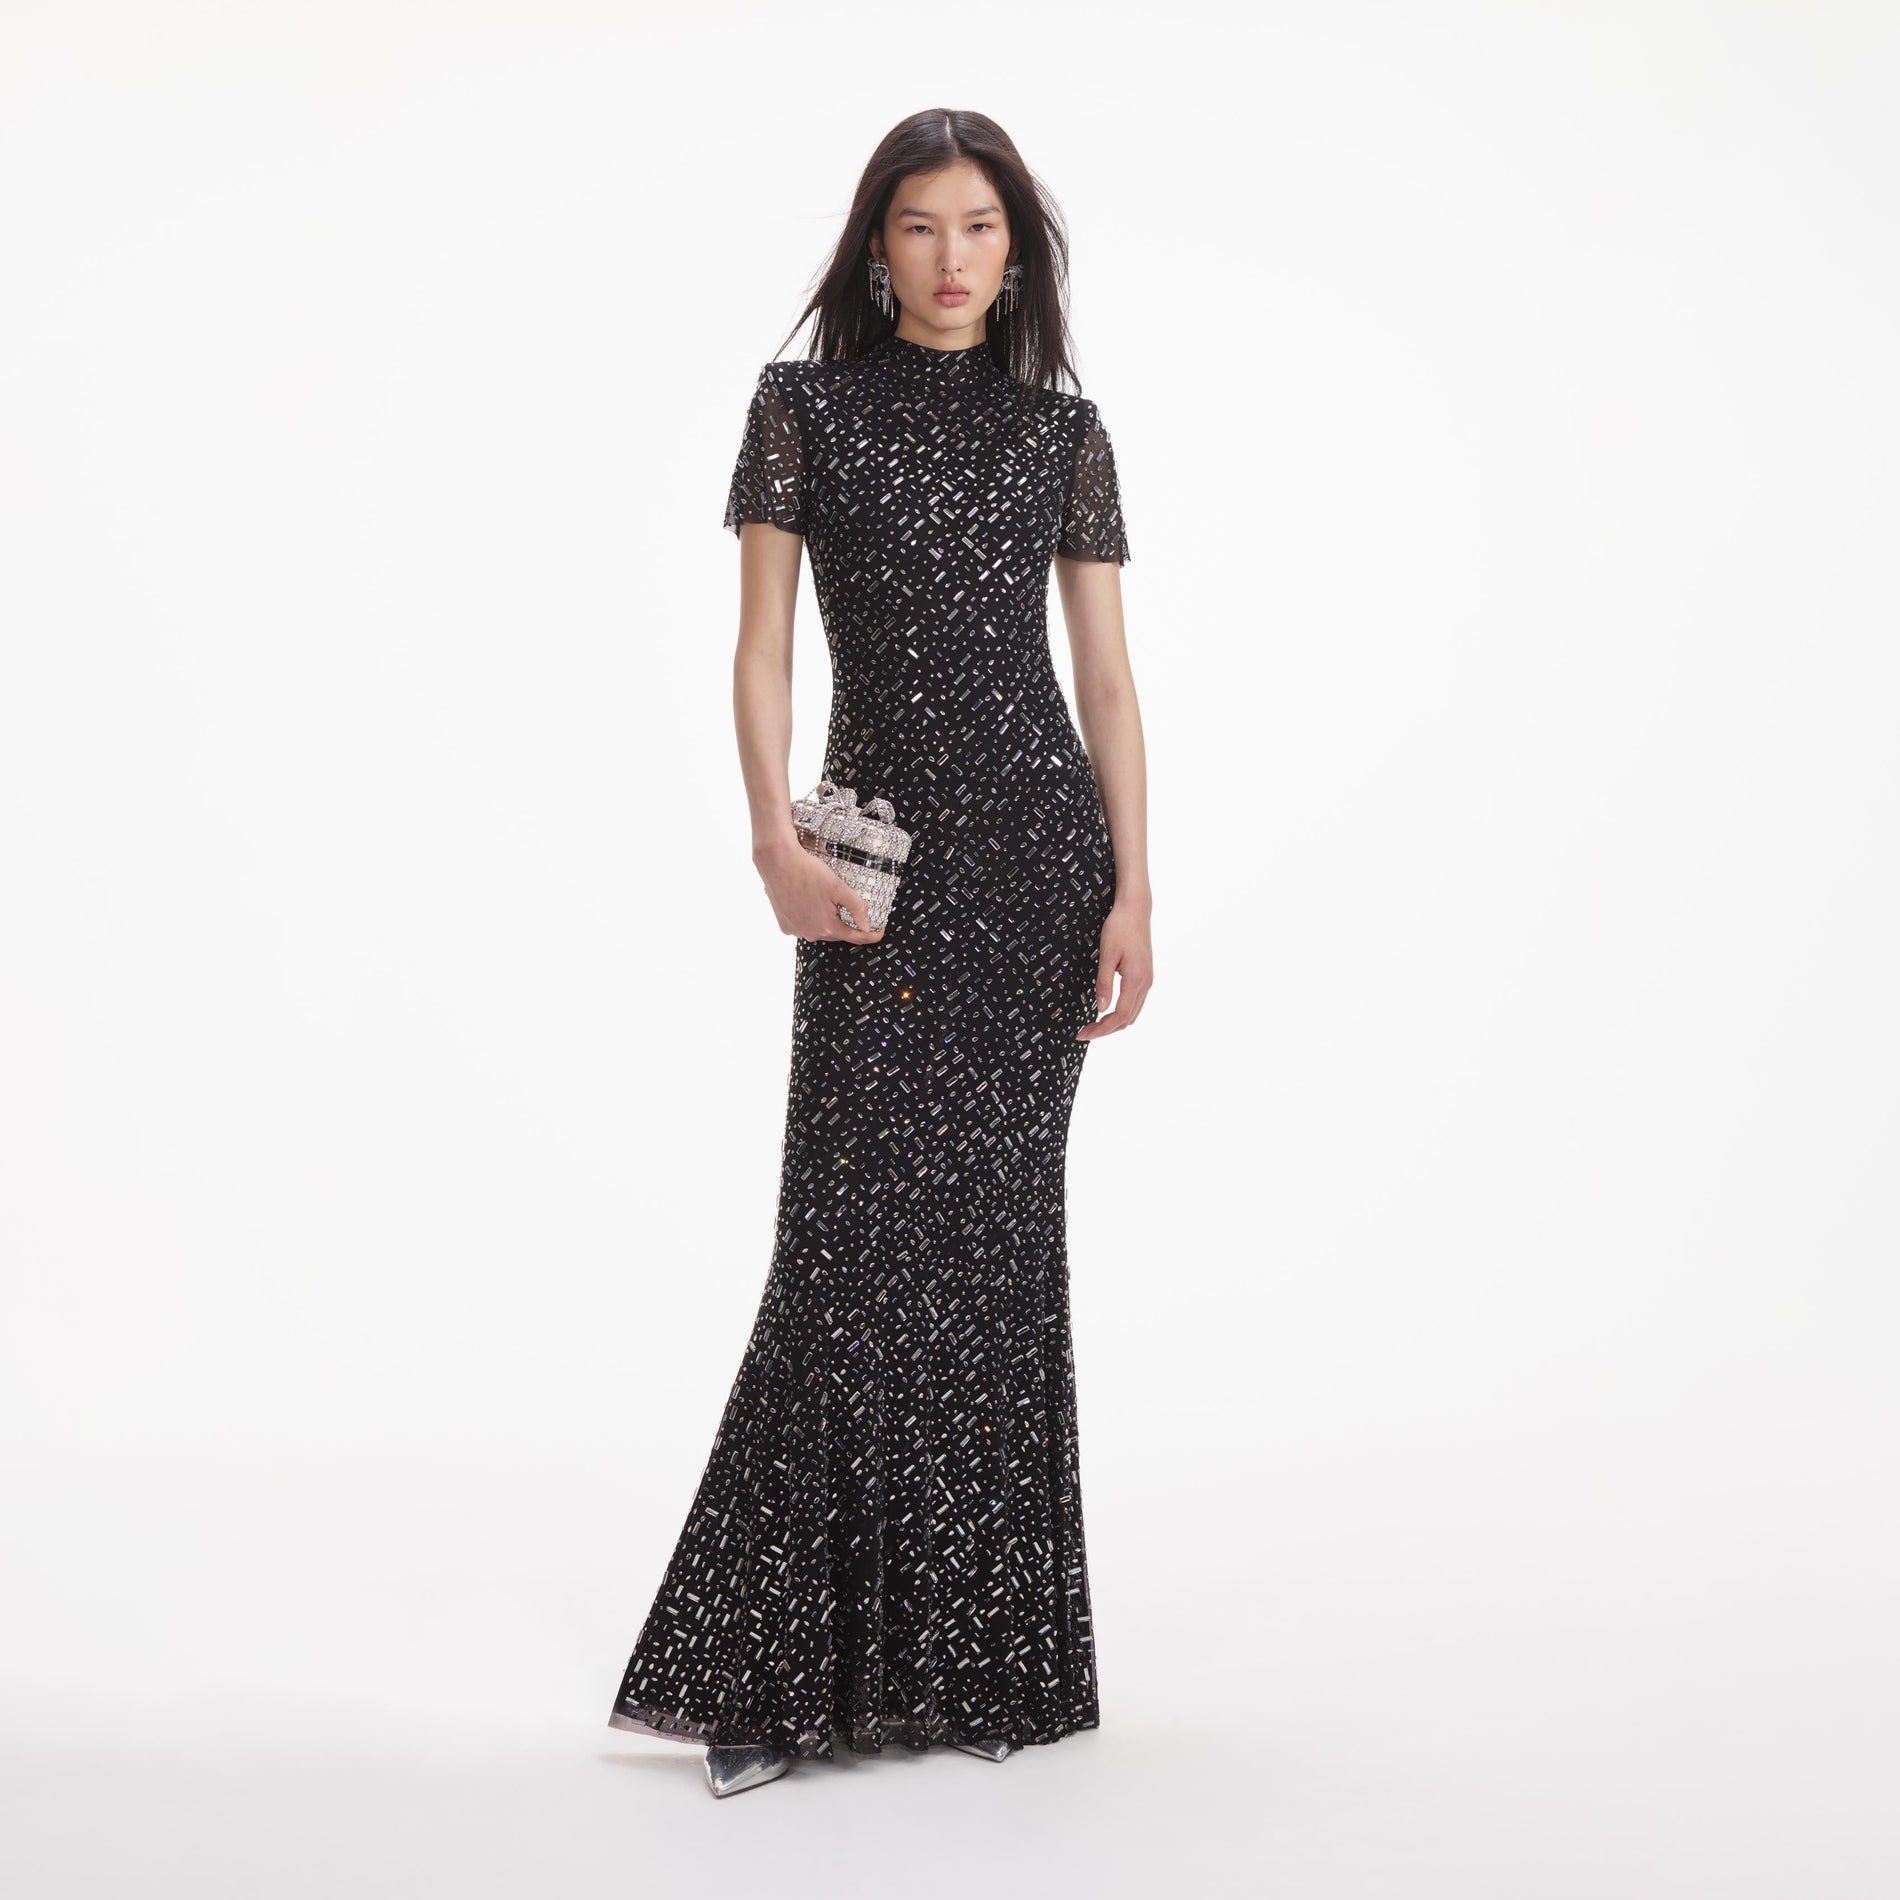 Front view of a woman wearing the Black Square Rhinestone Mesh Maxi Dress